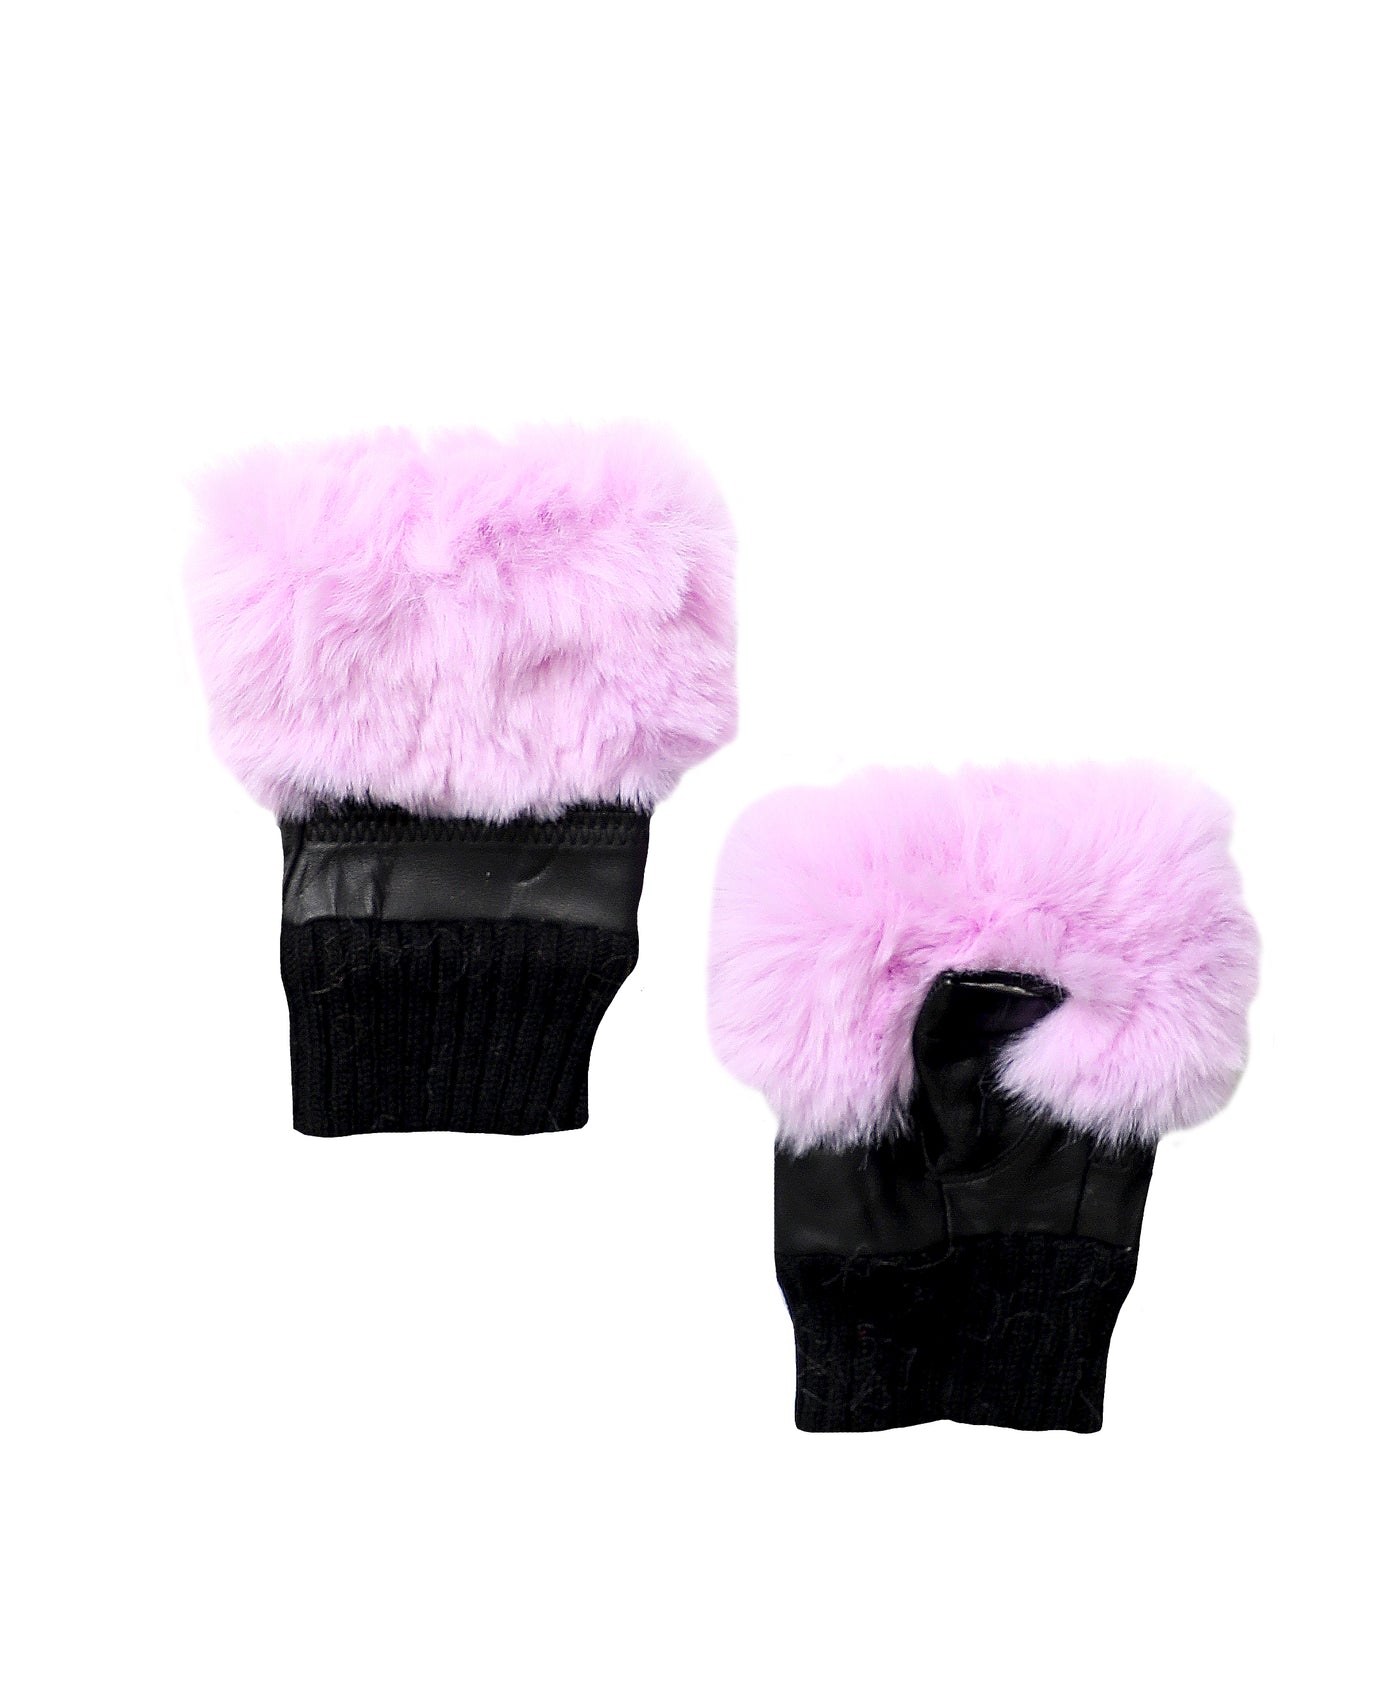 Leather Fingerless Gloves w/ Faux Fur image 1